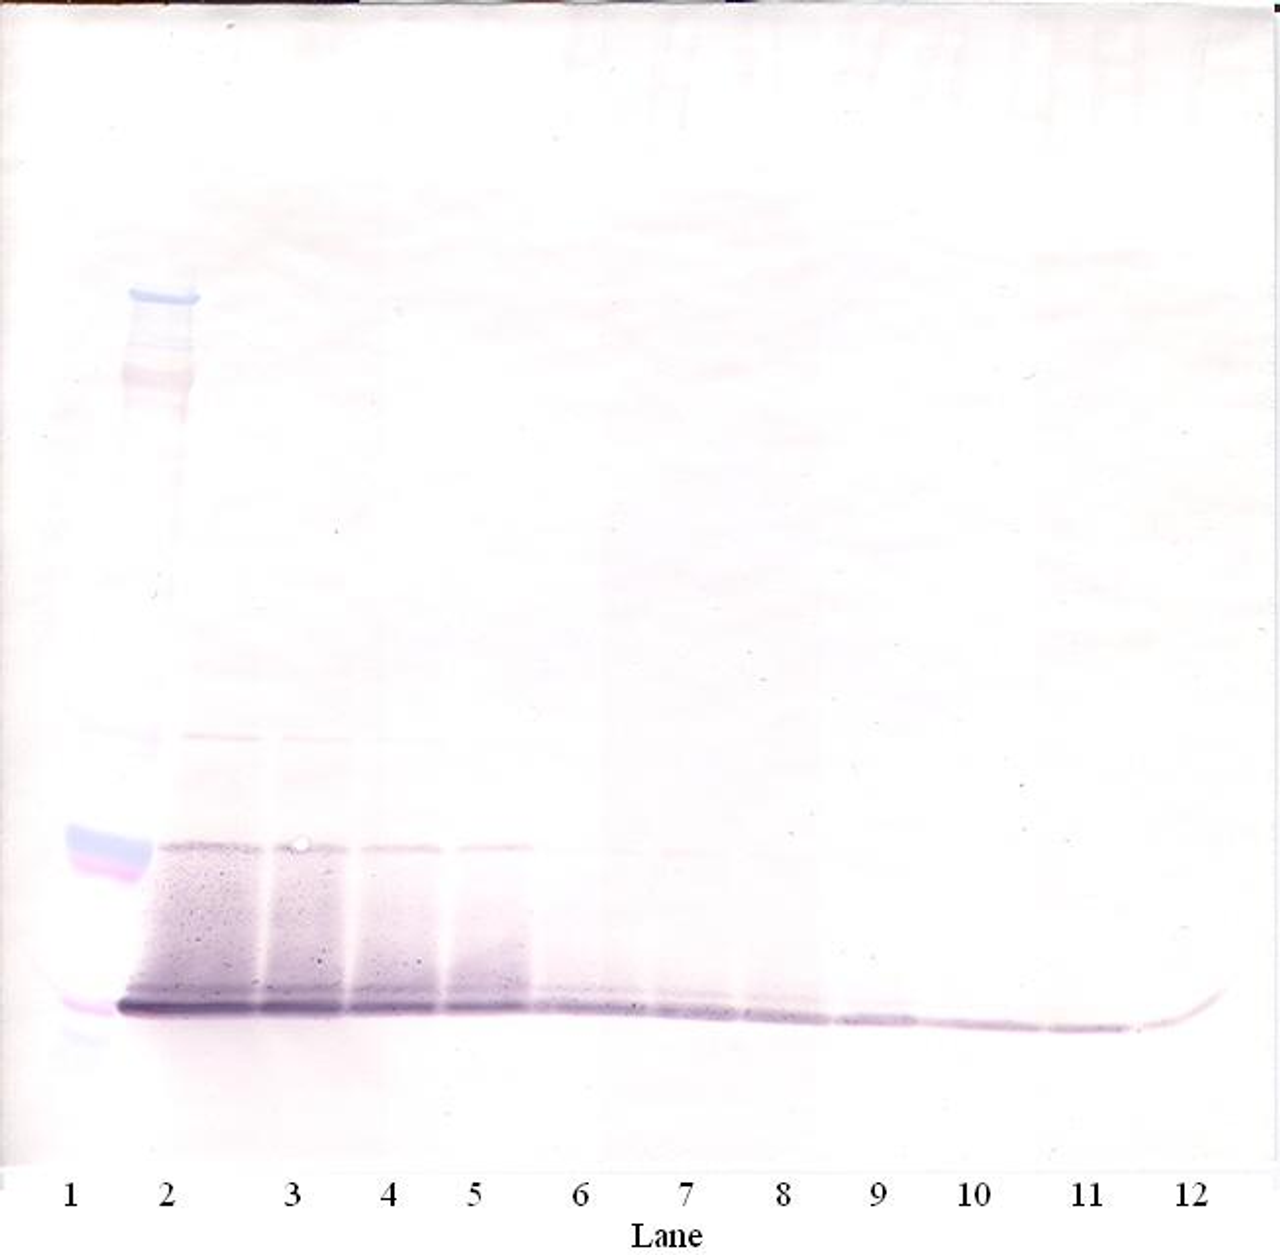 To detect Murine RELM-alpha by Western Blot analysis this antibody can be used at a concentration of 0.1 - 0.2 ug/ml. When used in conjunction with compatible secondary reagents, the detection limit for recombinant Murine RELM-alpha is 1.5 - 3.0 ng/lane, under either reducing or non-reducing conditions.